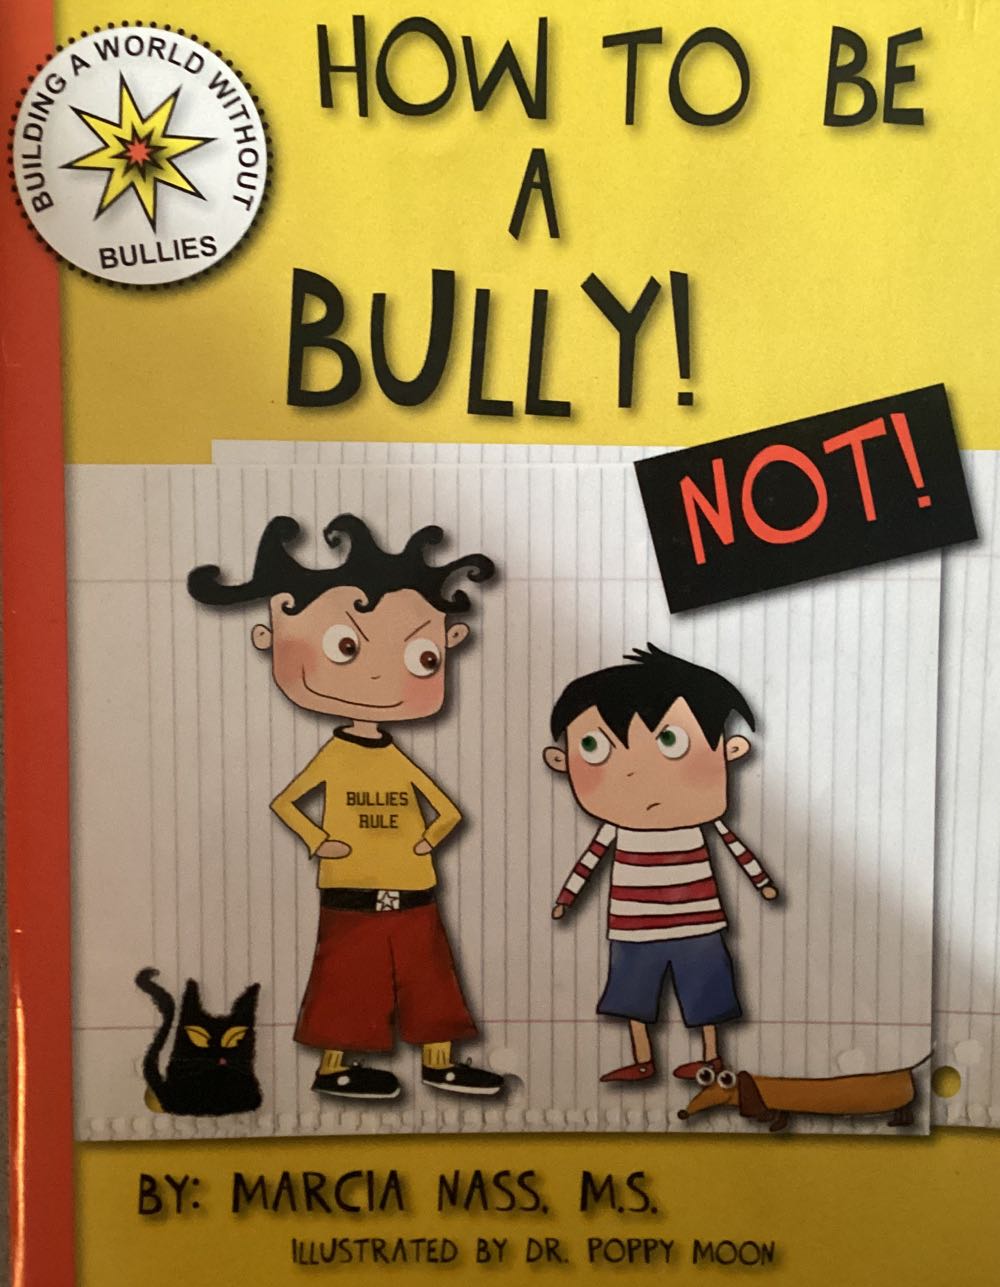 How To Be A Bully! Not! - Marcia Nass, M.S. book collectible - Main Image 1